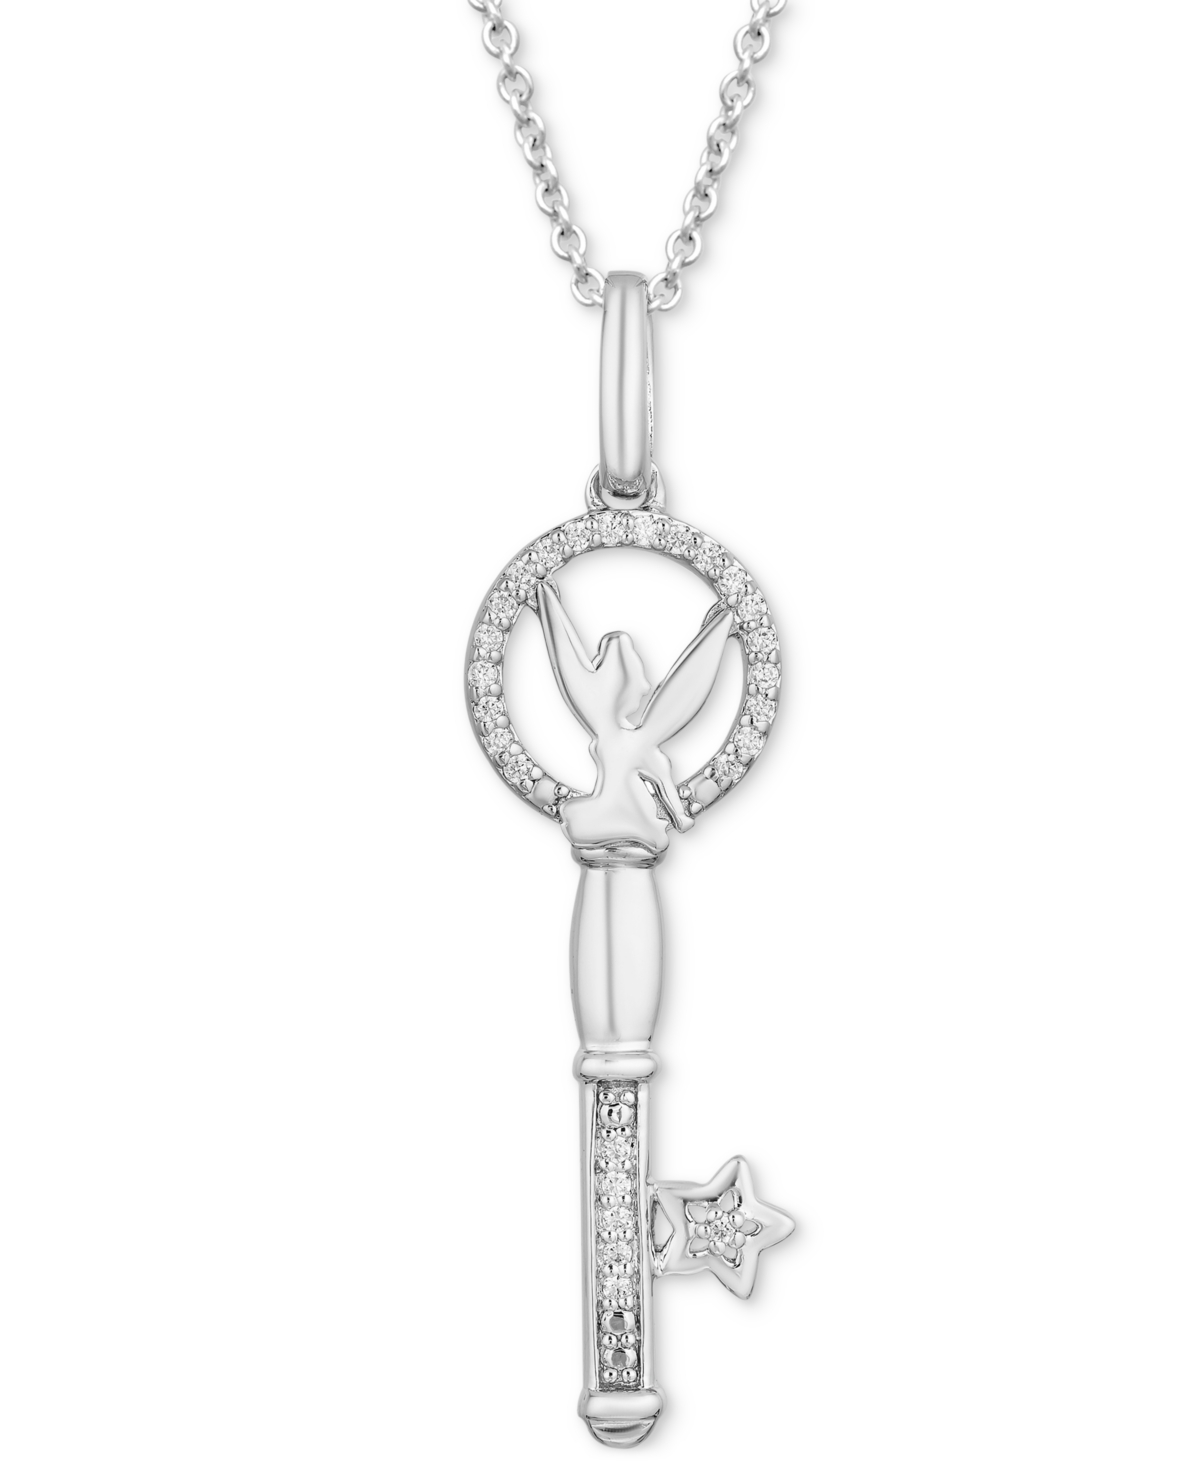 Diamond Tinker Bell Key Pendant Necklace (1/10 ct. t.w.) in Sterling Silver, 16" + 2" extender - Sterling Silver